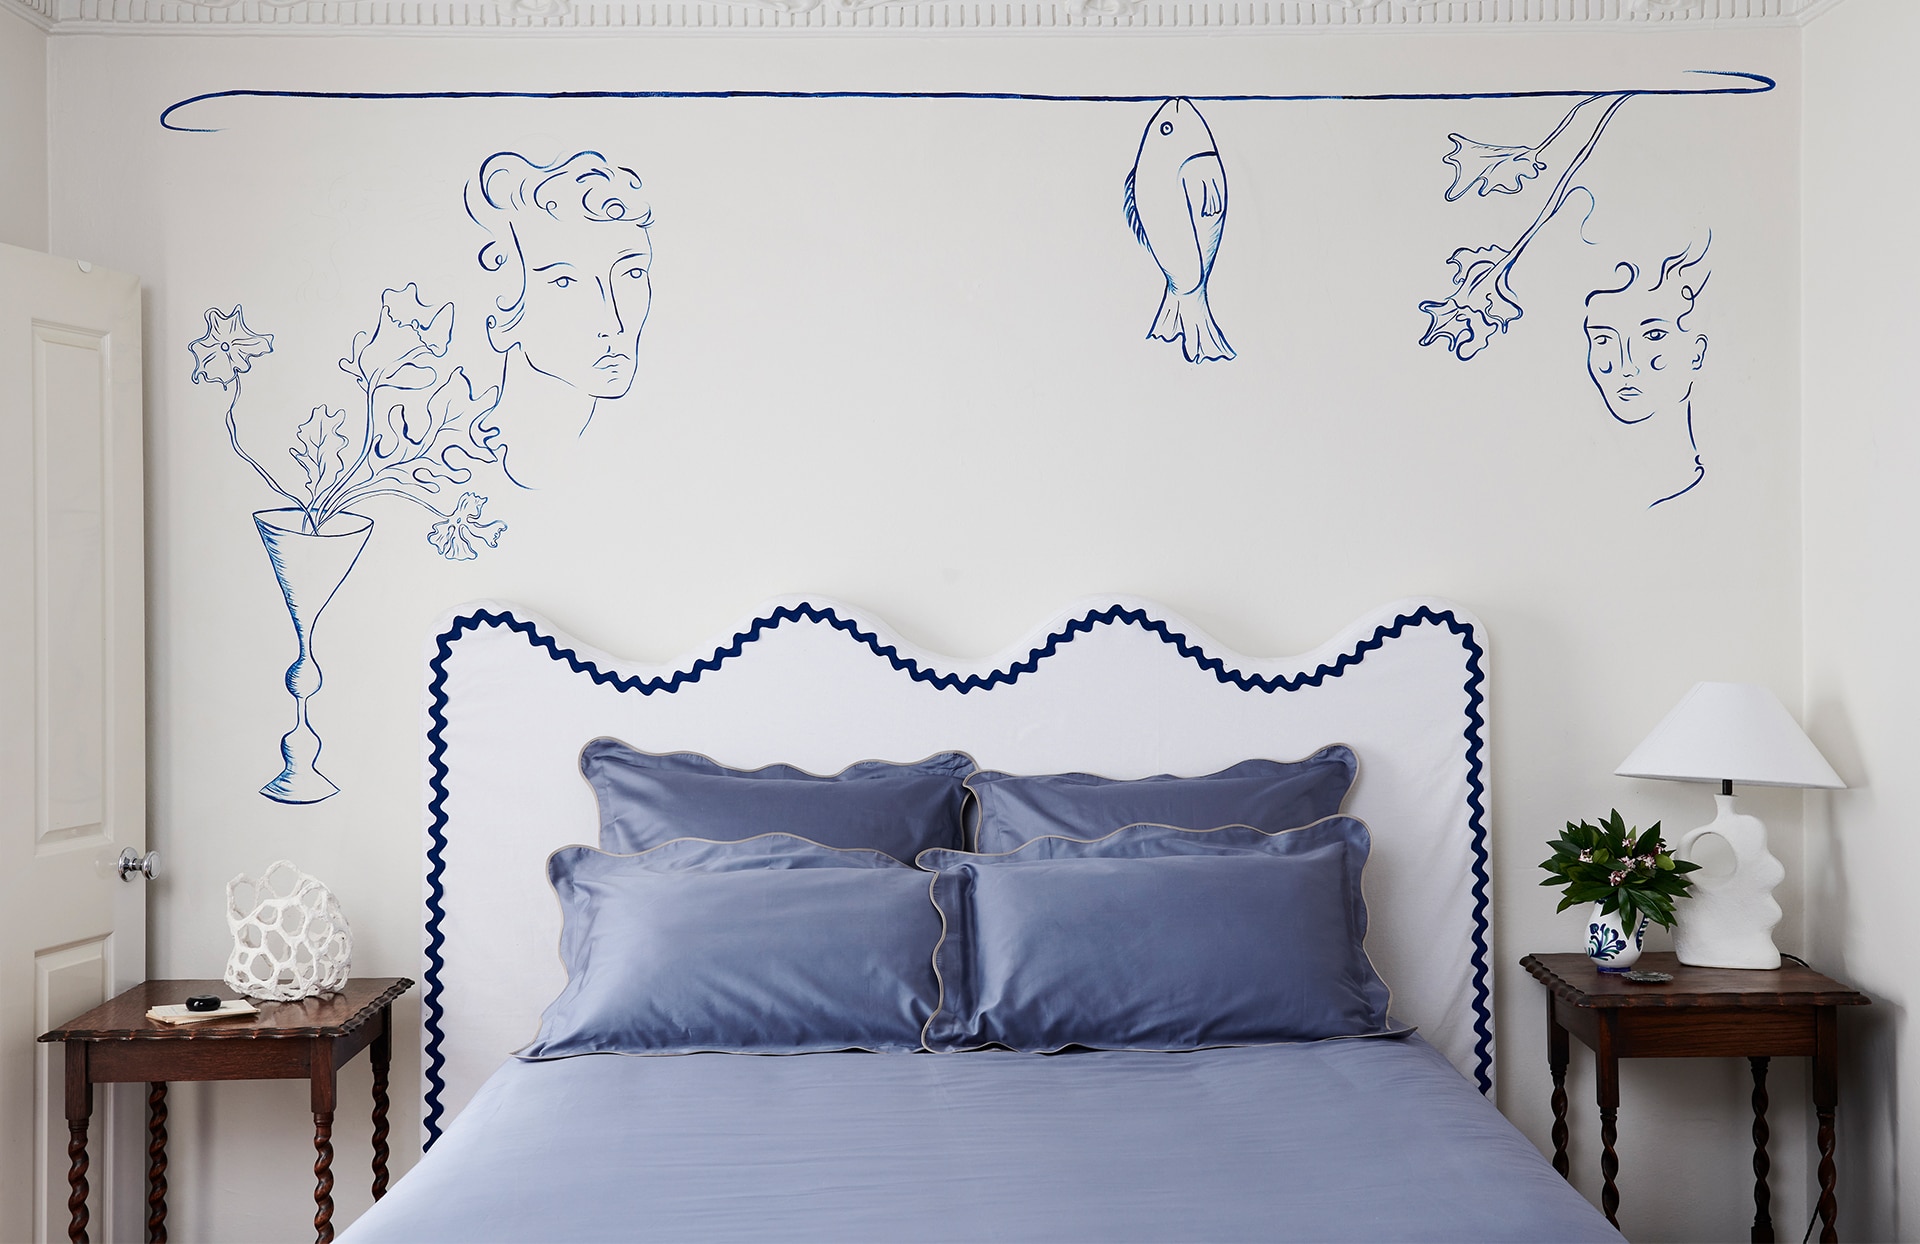 landscape image of bailey jones master bedroom. bedding made with sheridan tamber collection in smokey blue, with scalloped edges. scalloped white bedframe with blue trim behind. wooden side tables on each side of bed. white wall has hand painted mural.